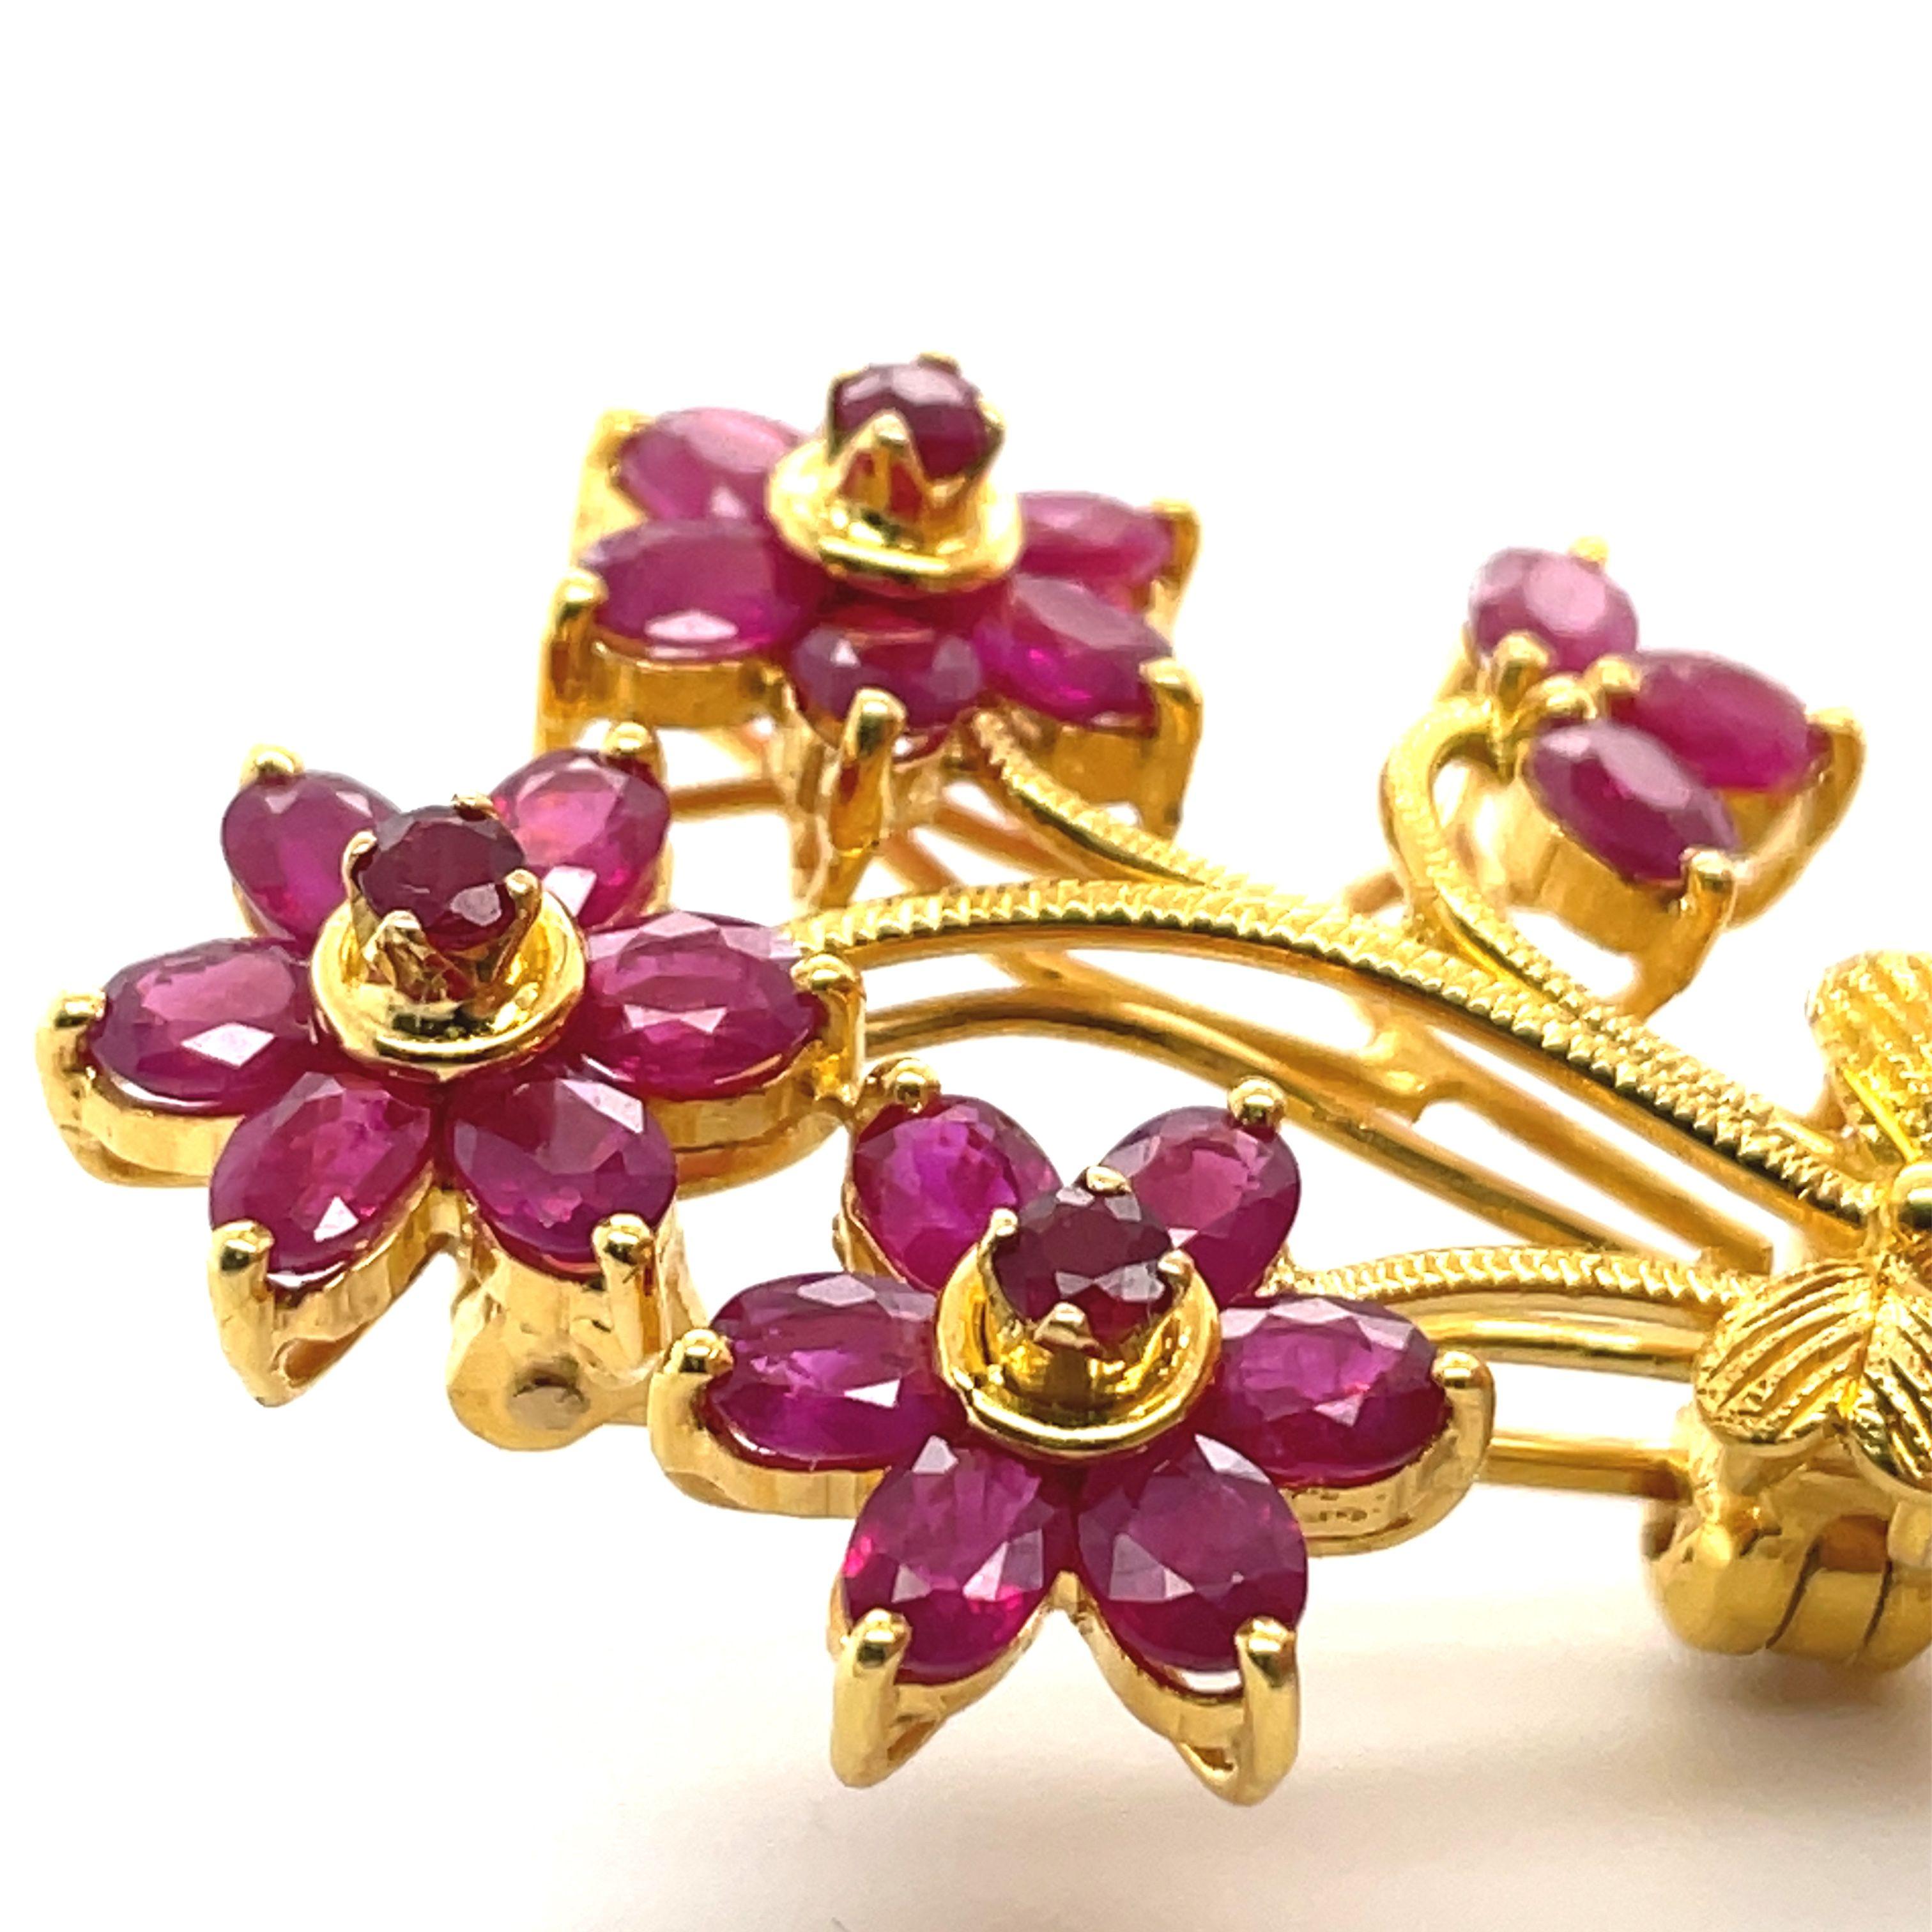 Art Nouveau Vintage Flowers Brooch, 22k Yellow Gold, 2 Carat Natural Ruby Estate Ruby Brooch For Sale